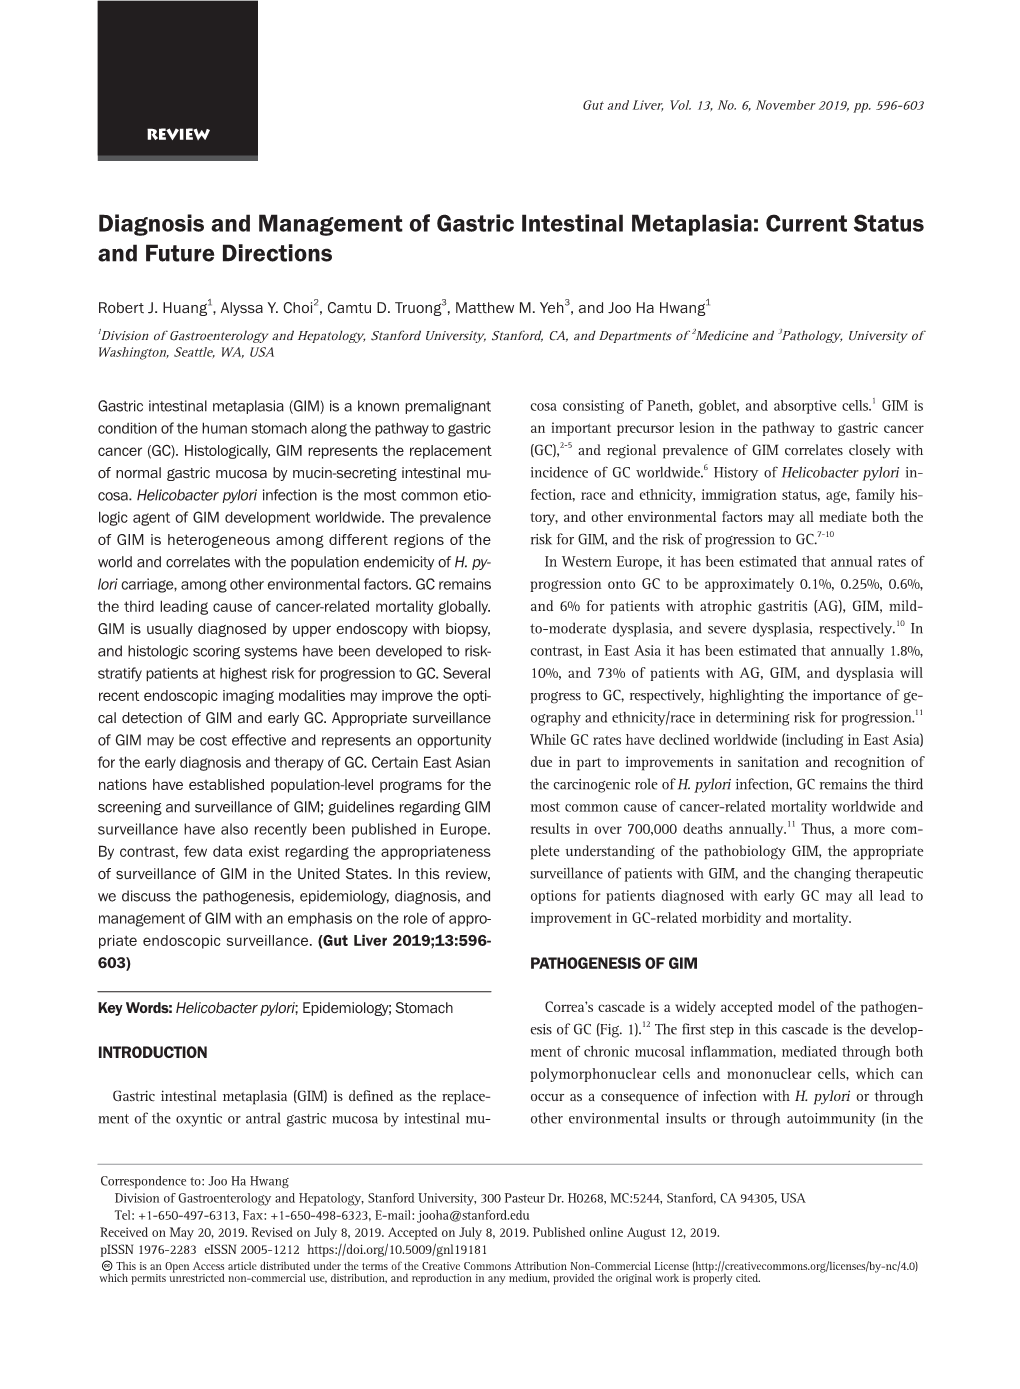 Diagnosis and Management of Gastric Intestinal Metaplasia: Current Status and Future Directions